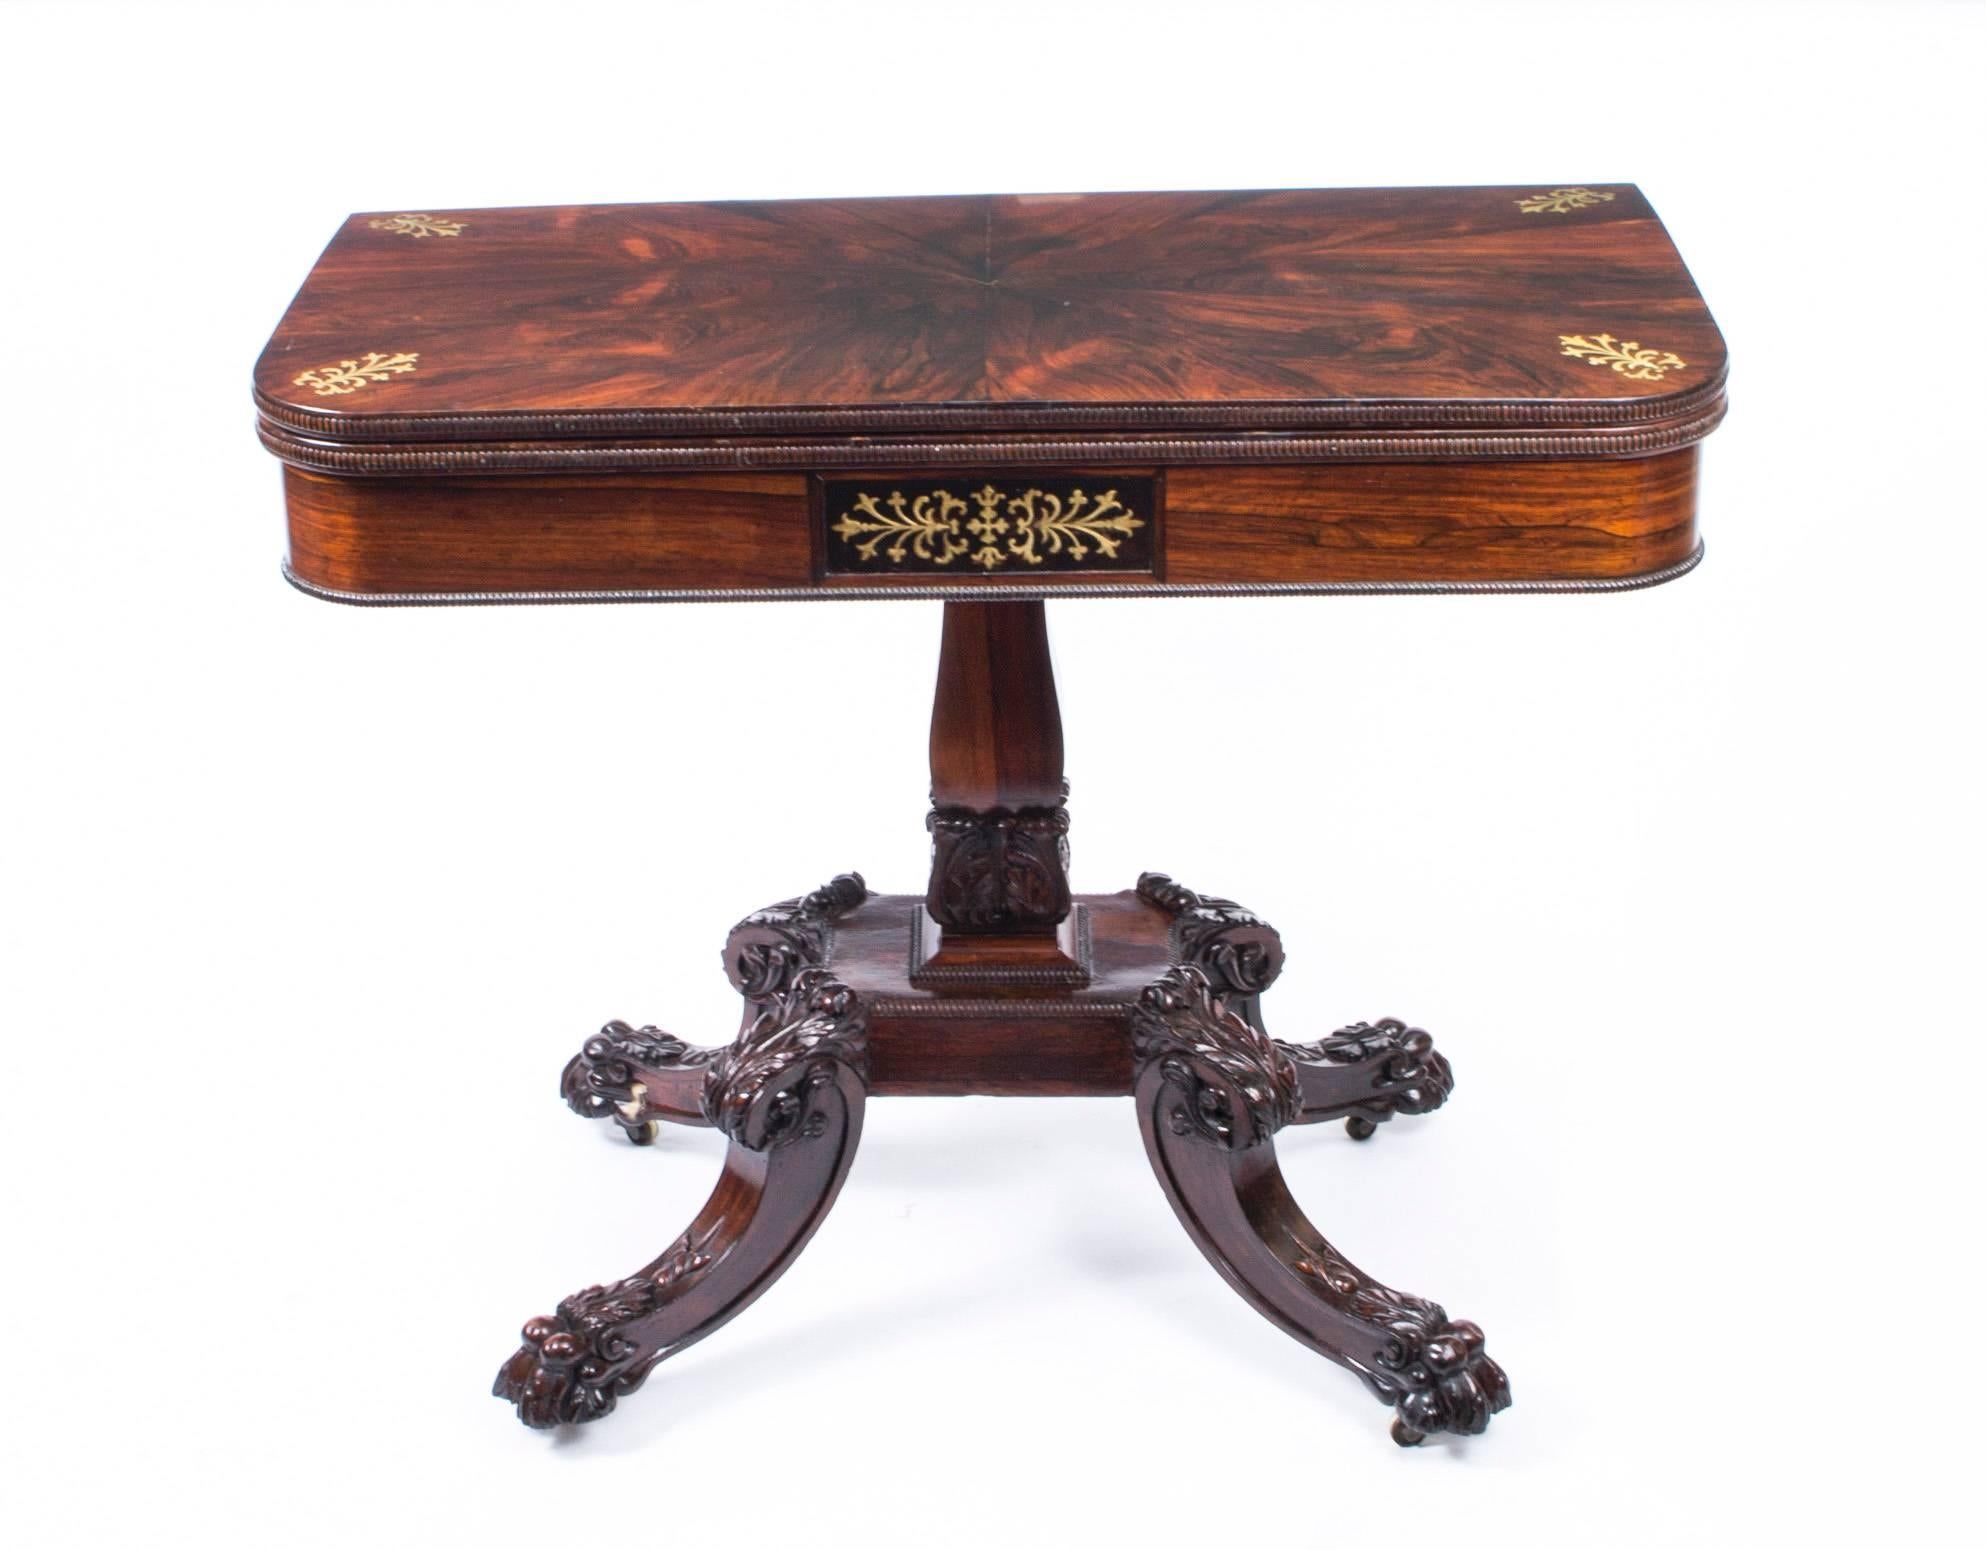 This is a very attractive antique English Regency rosewood and cut brass marquetry card table, circa 1825 in date.

This rounded rectangular card table is made from beautiful rosewood, the folding top enclosing a green baize lined playing surface.